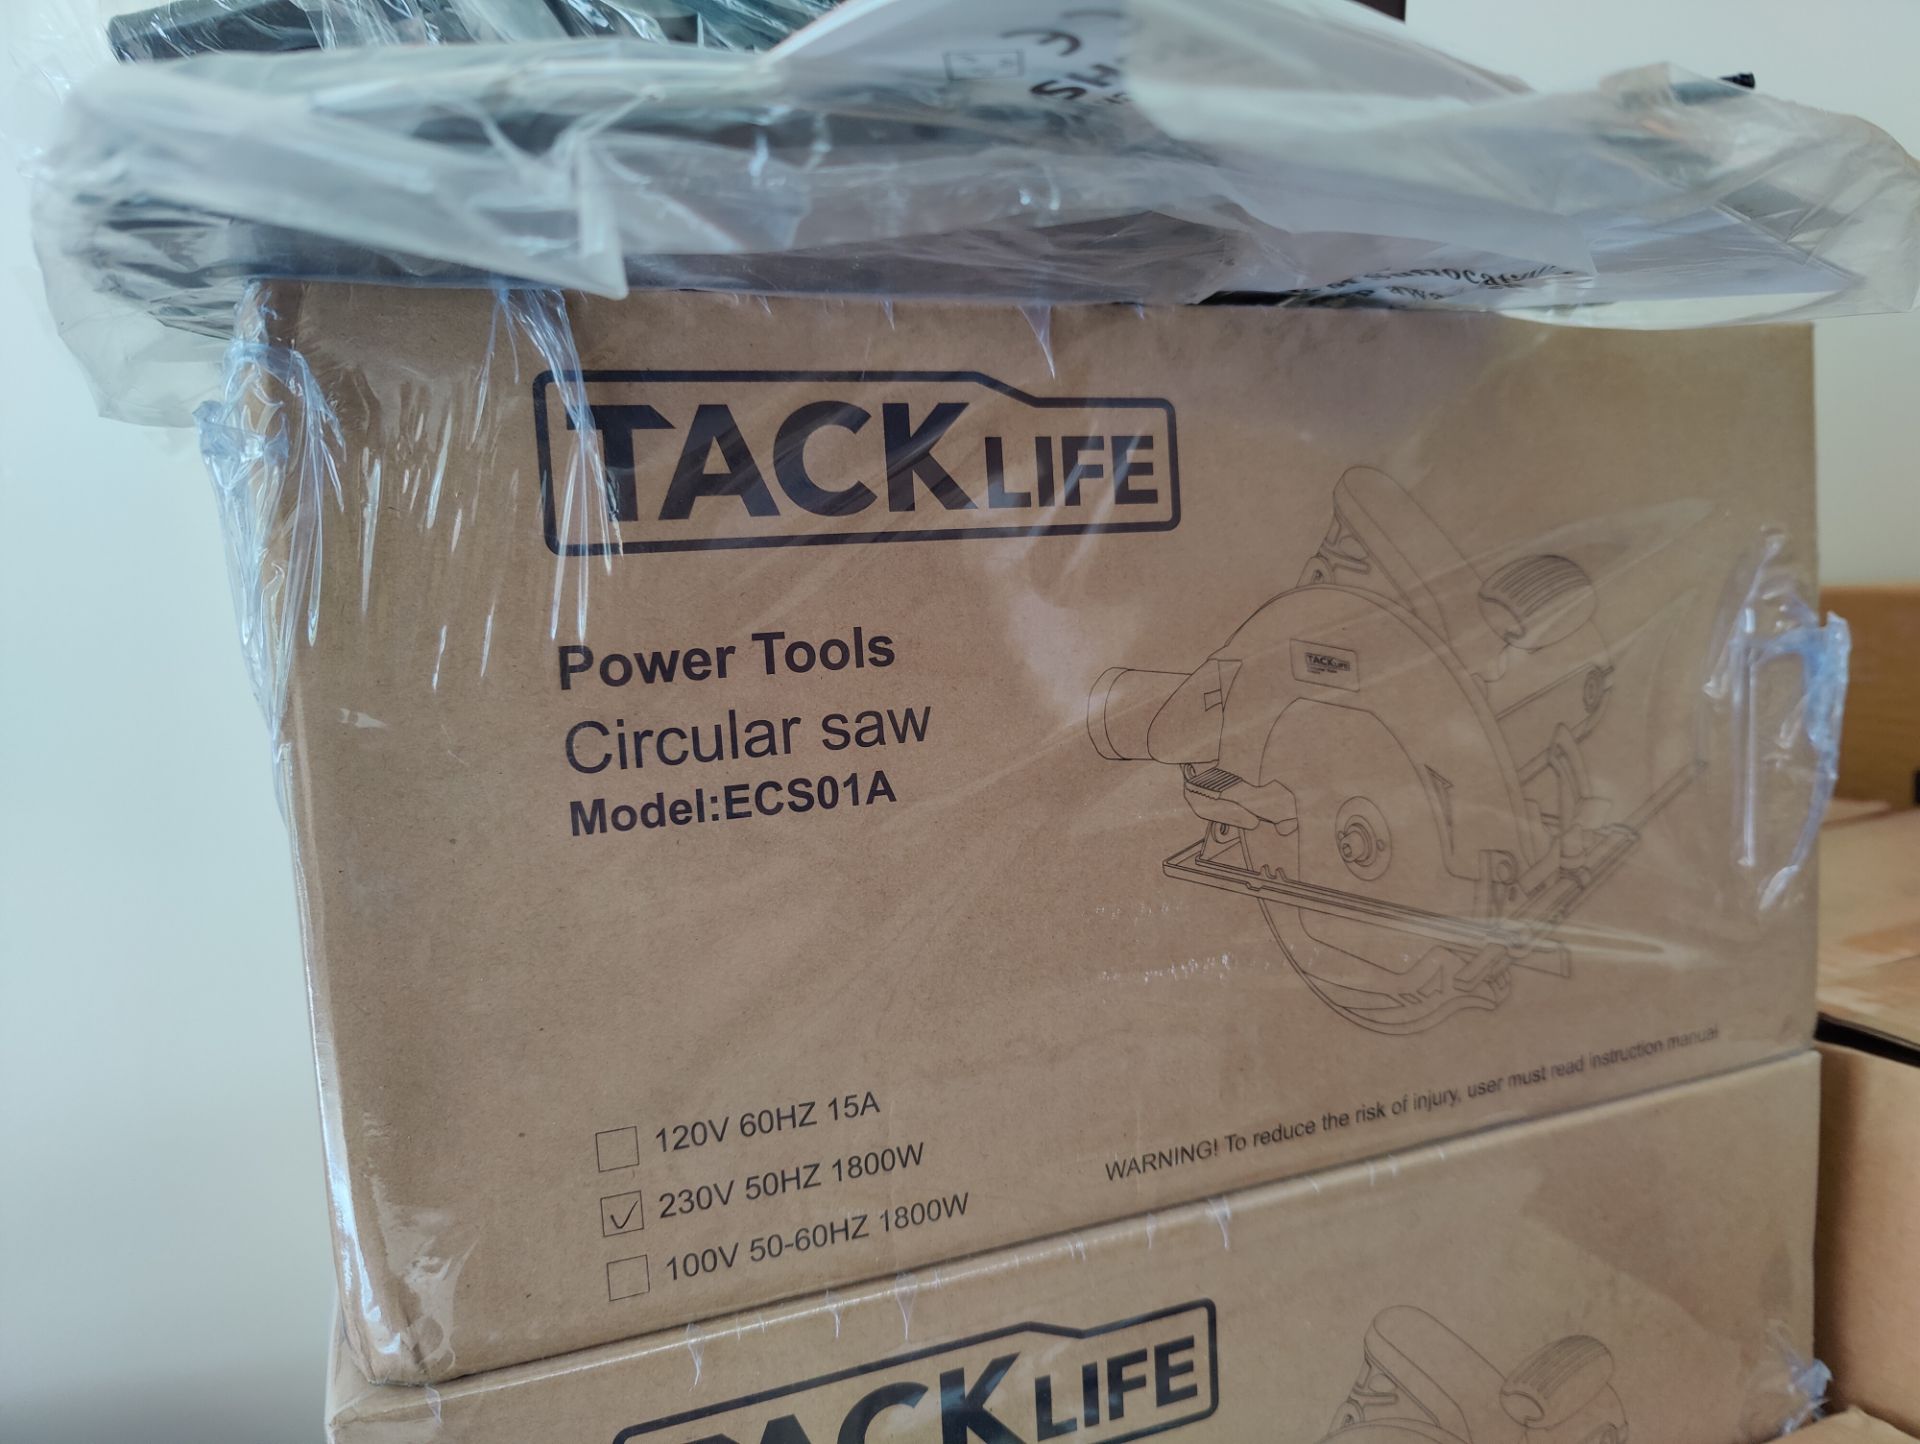 New Boxed Tacklife Electric Circular Saw,1500W, 5000 RPM With Bevel Cuts 2-3/5' - Image 3 of 4